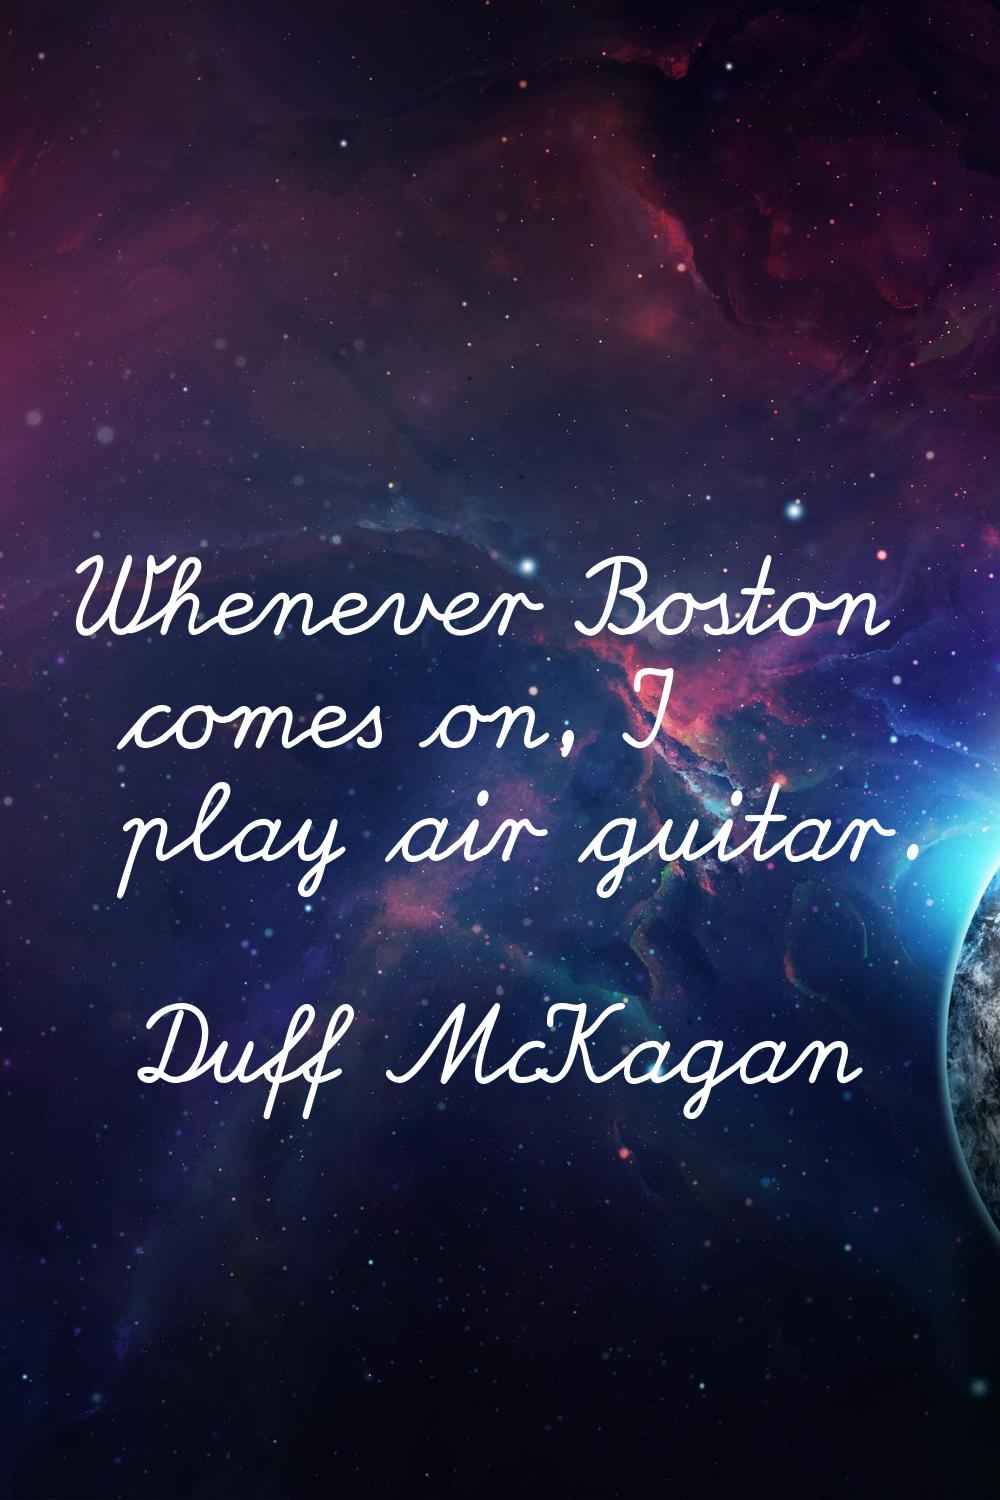 Whenever Boston comes on, I play air guitar.